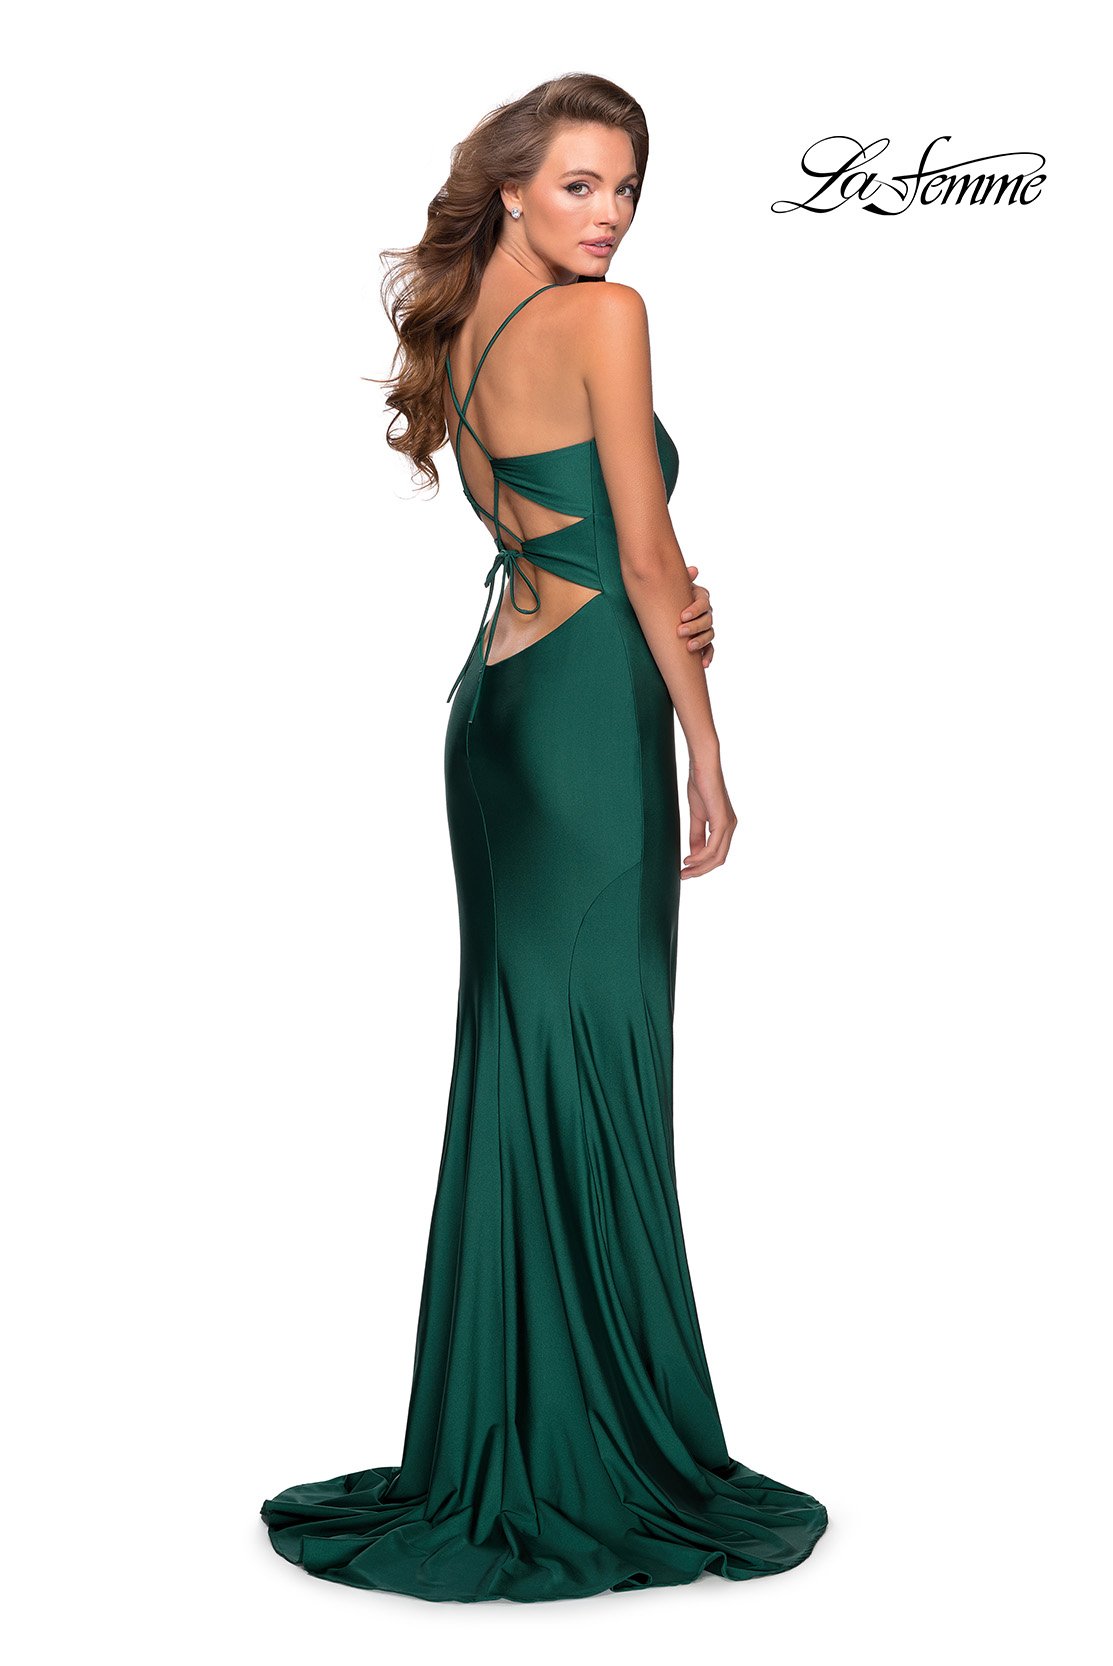 La Femme 28584 dress images in these colors: Emerald, Royal Blue, White.